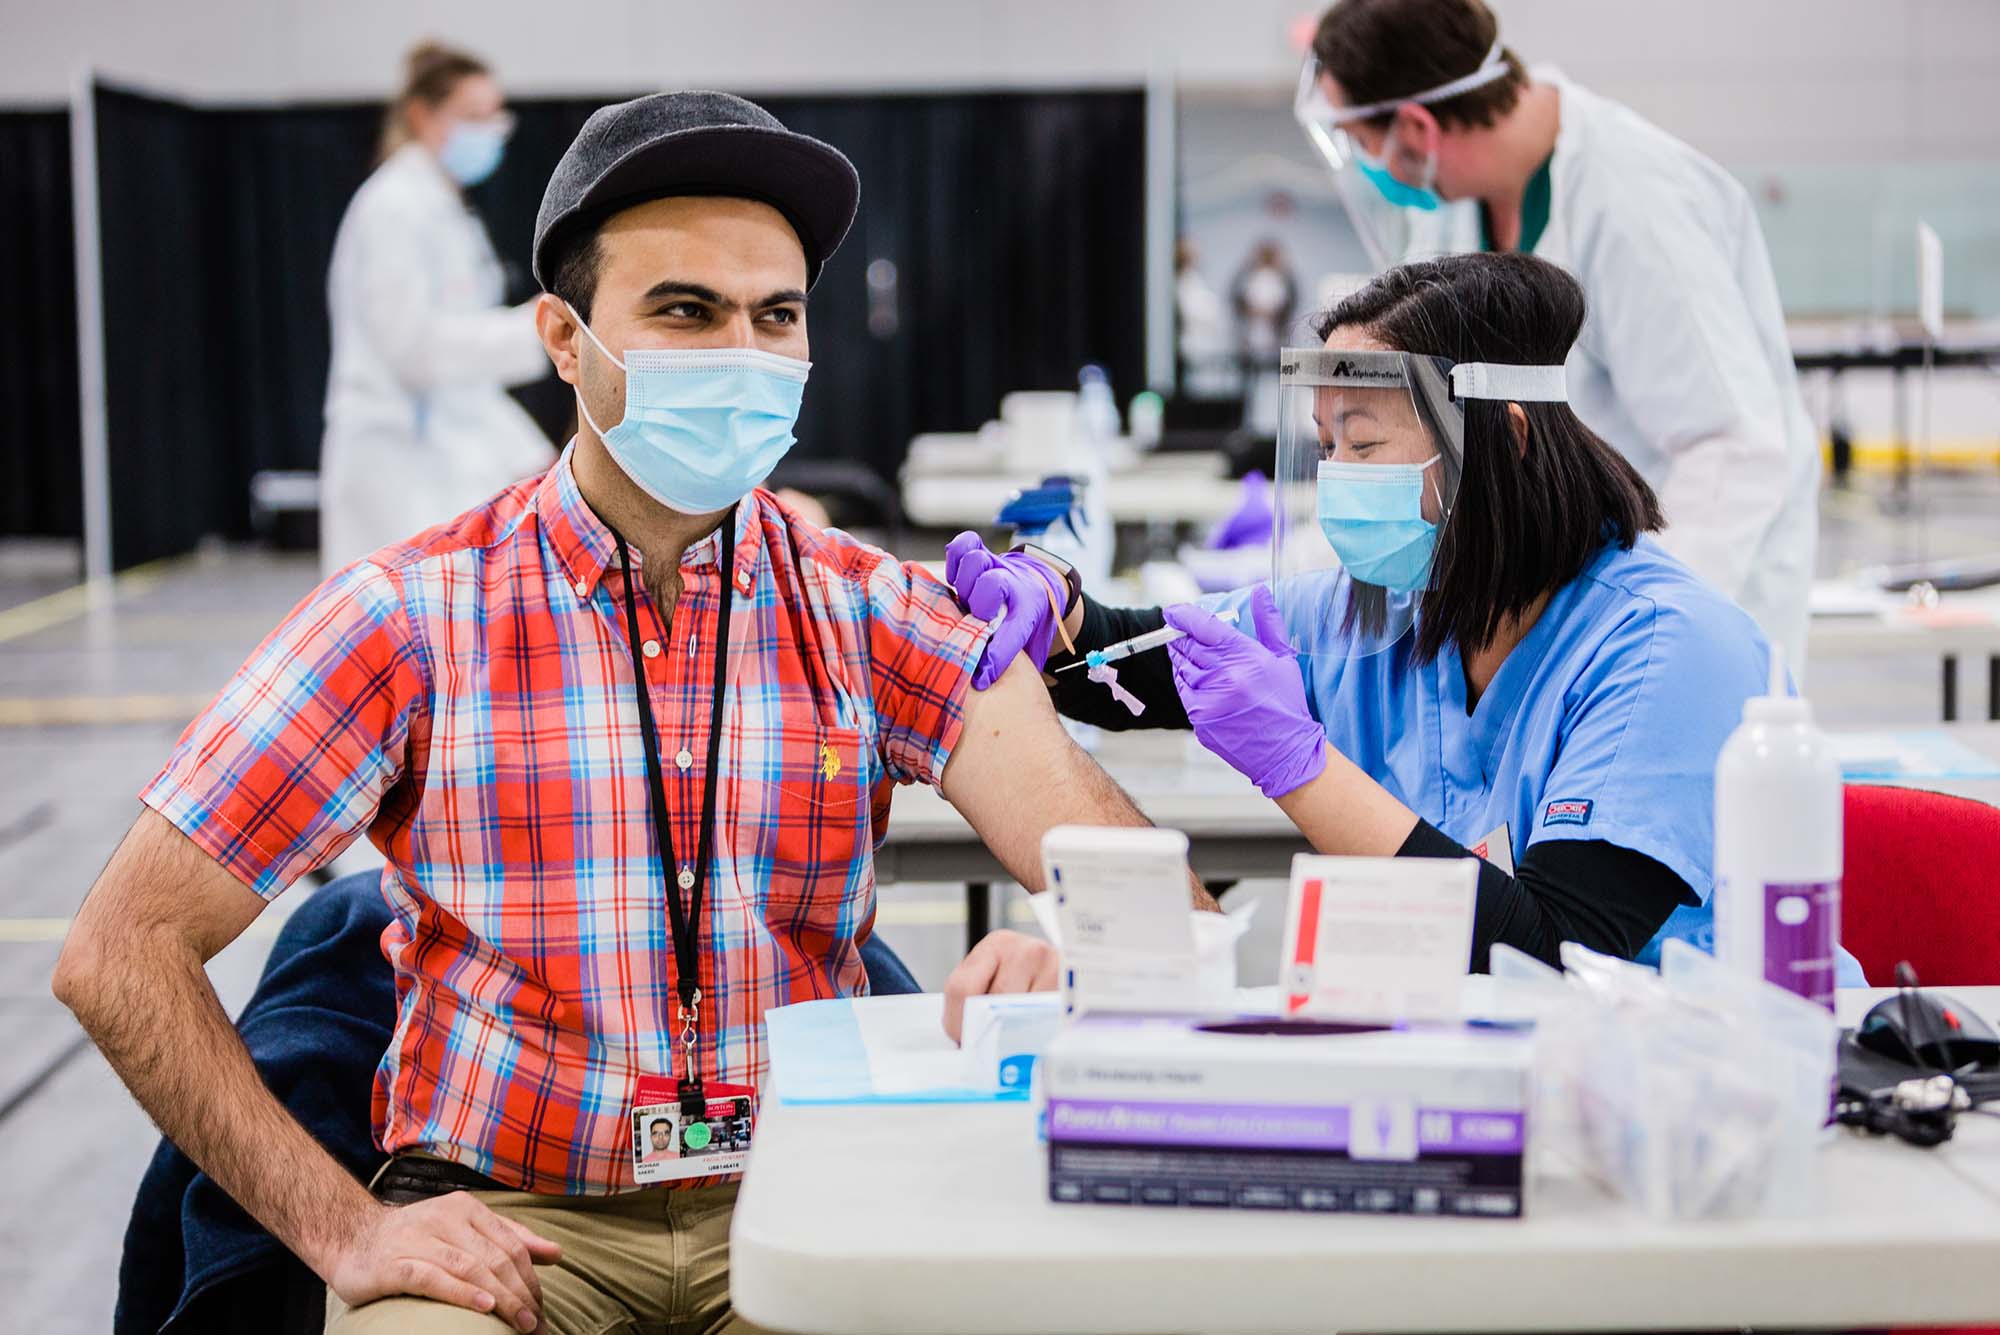 Photo of Mohsan Saeed, a School of Medicine assistant professor, getting a first vaccine dose in January of 2021. He wears a red and blue plaid shirt and gray hat, while the nurse, in a face mask and shield gives him a vaccine in his left arm.